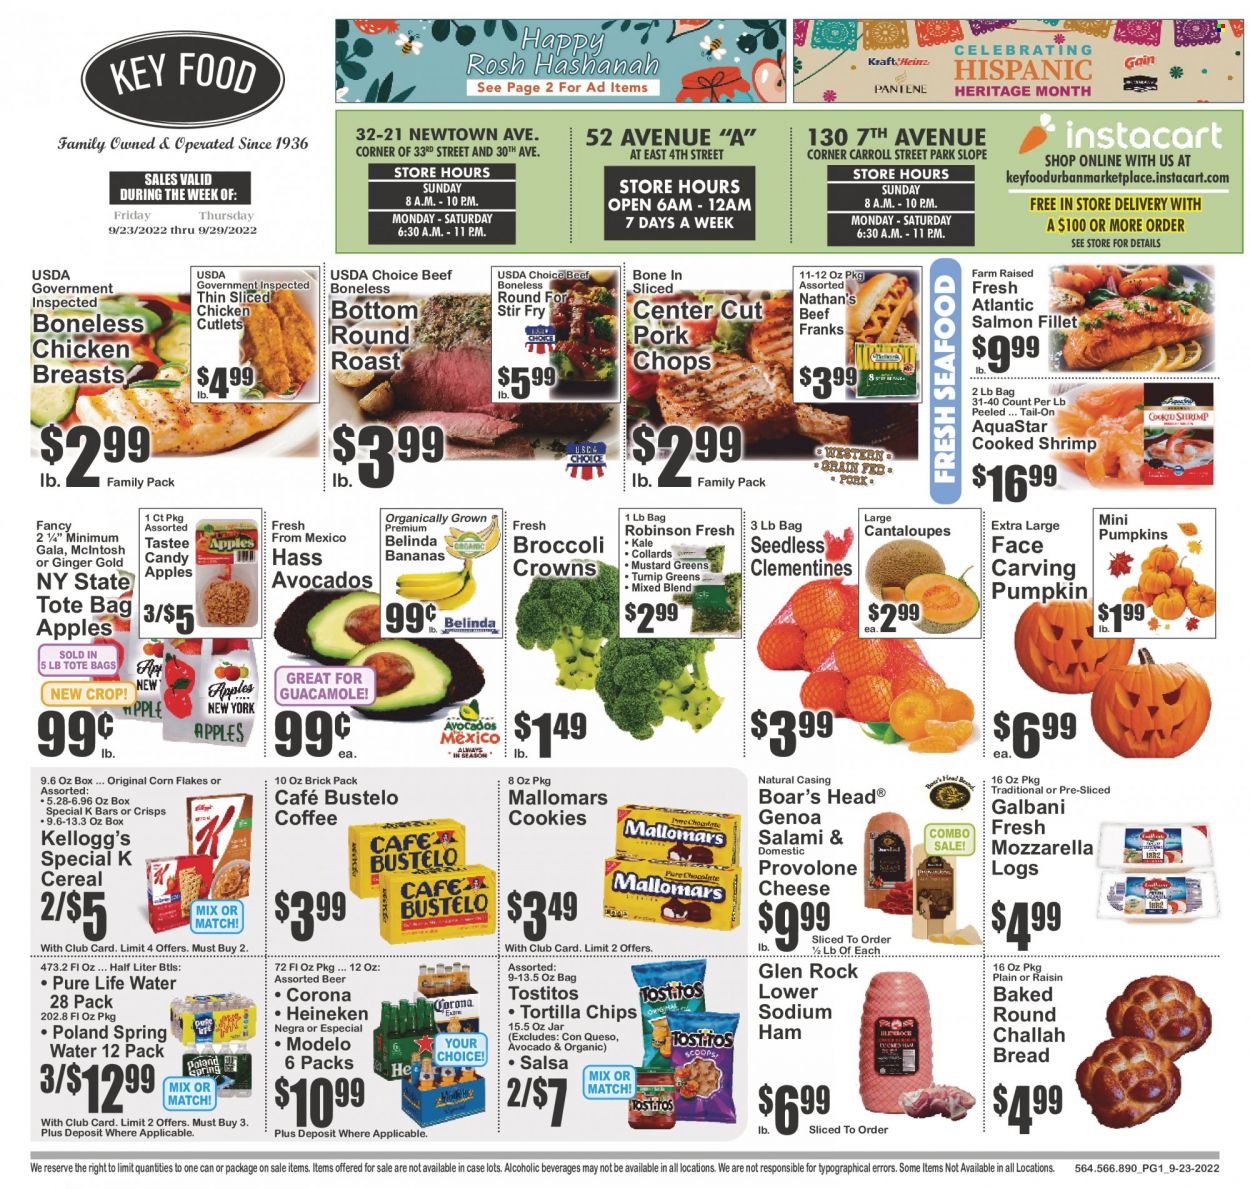 thumbnail - Key Food Flyer - 09/23/2022 - 09/29/2022 - Sales products - bread, challah, cantaloupe, ginger, kale, pumpkin, apples, bananas, Gala, salmon, salmon fillet, seafood, shrimps, Kraft®, salami, ham, guacamole, mozzarella, cheese, Galbani, Provolone, cookies, Kellogg's, tortilla chips, chips, Tostitos, Heinz, cereals, corn flakes, mustard, salsa, spring water, Pure Life Water, coffee, beer, Corona Extra, Heineken, Modelo, chicken breasts, chicken cutlets, beef meat, round roast, pork chops, pork meat, Gain, Pantene, fork, clementines, mustard greens. Page 1.